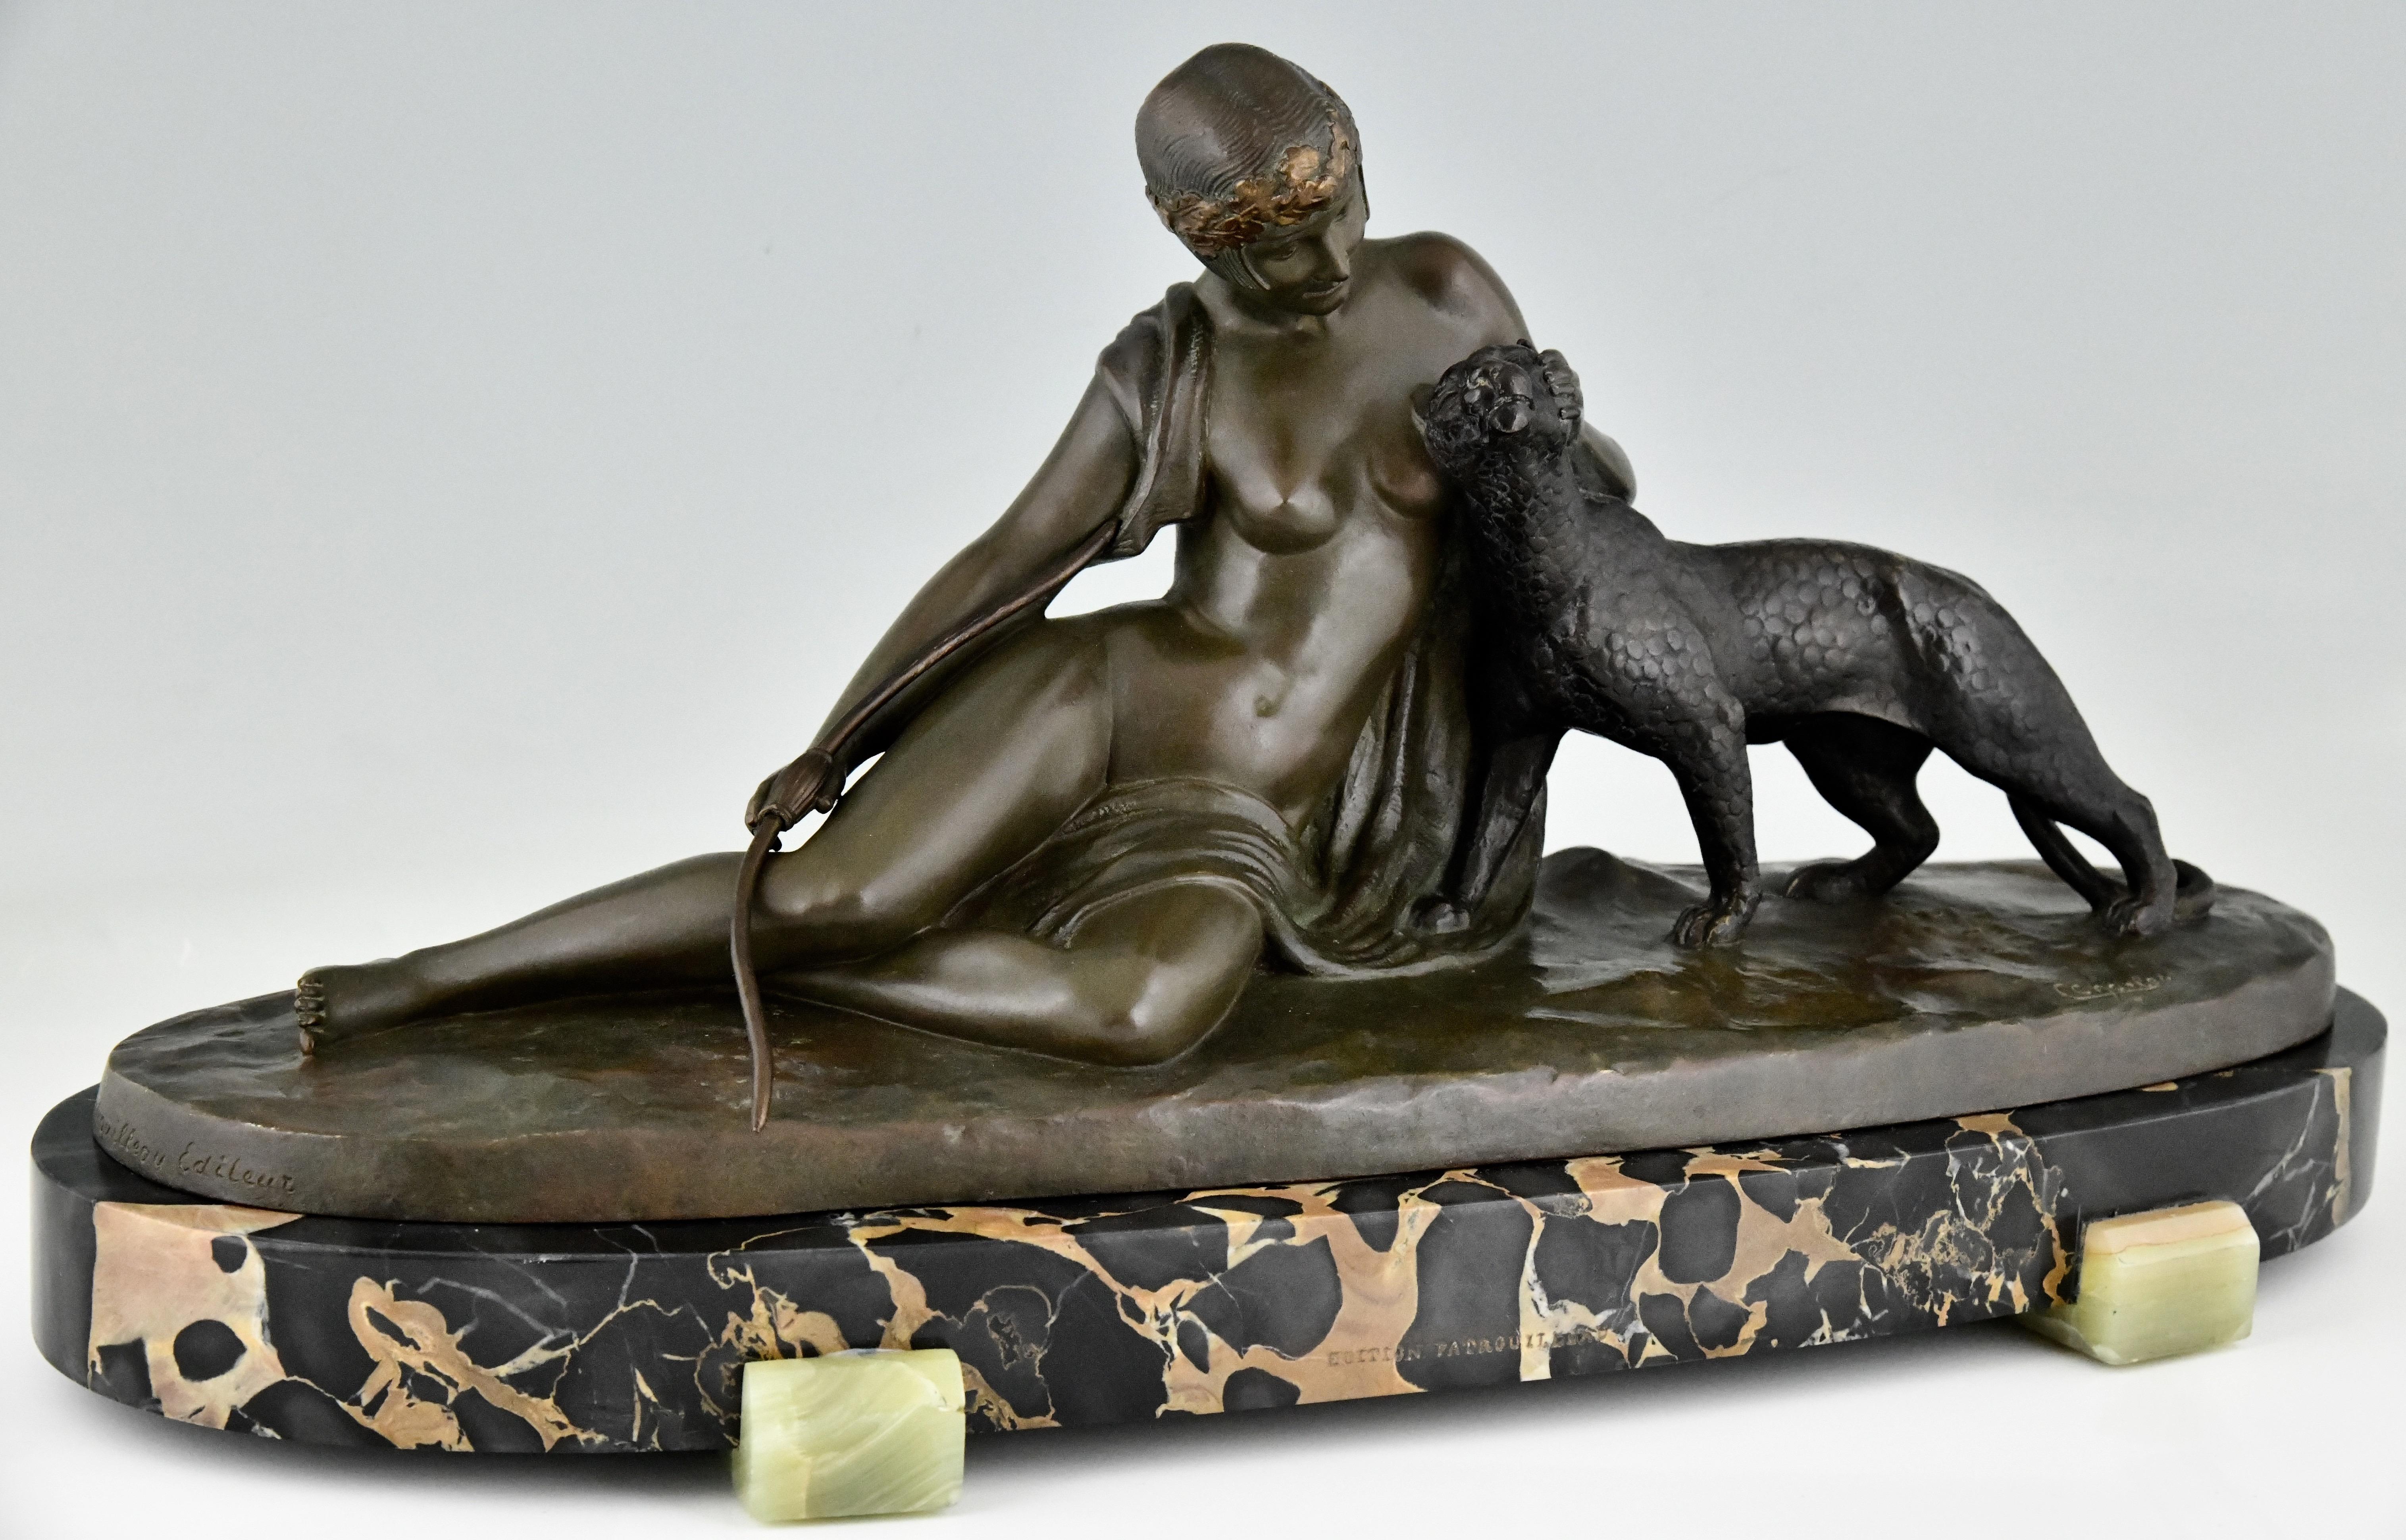 Art Deco bronze sculpture lady with panther signed by C. Charles. The sculpture has the foundry mark of Patrouilleau and is marked Bronze. The lady and panther stand on a Portor marble base with onyx details. France 1930.

The dictionary of